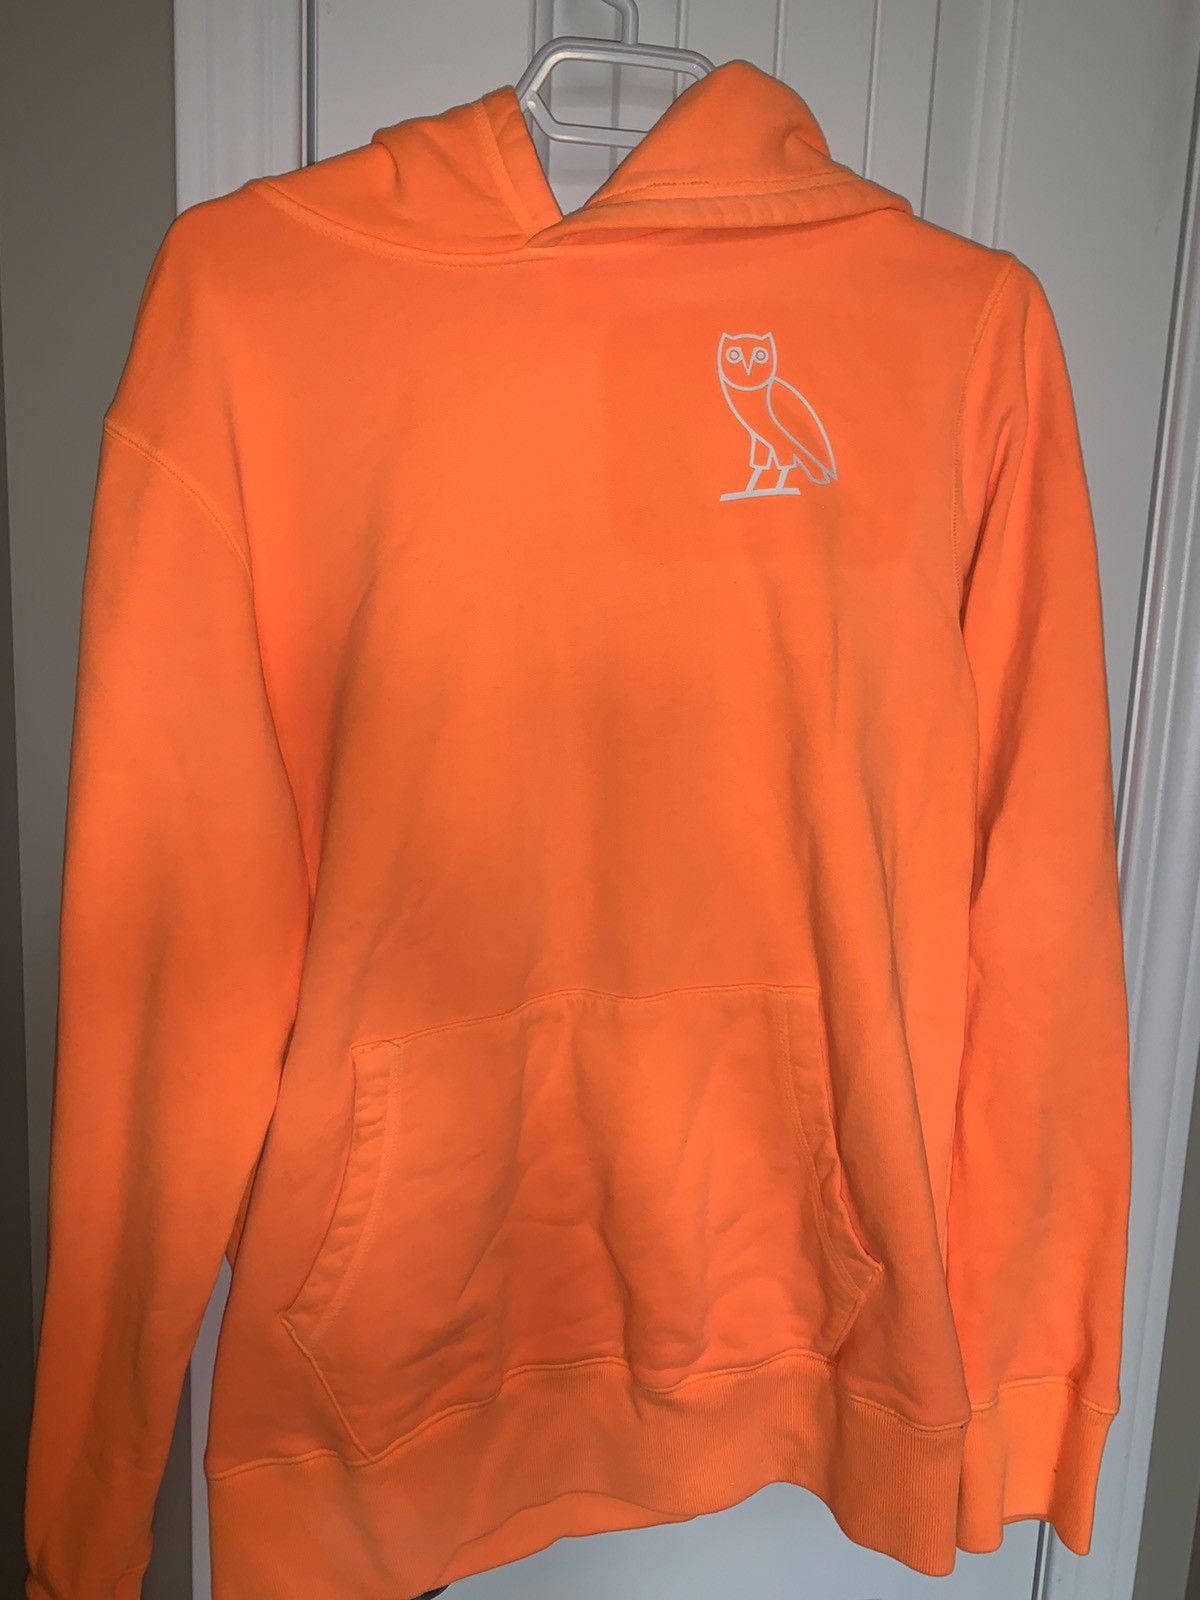 Octobers Very Own OVO Orange Dye Hoodie Size US M / EU 48-50 / 2 - 1 Preview